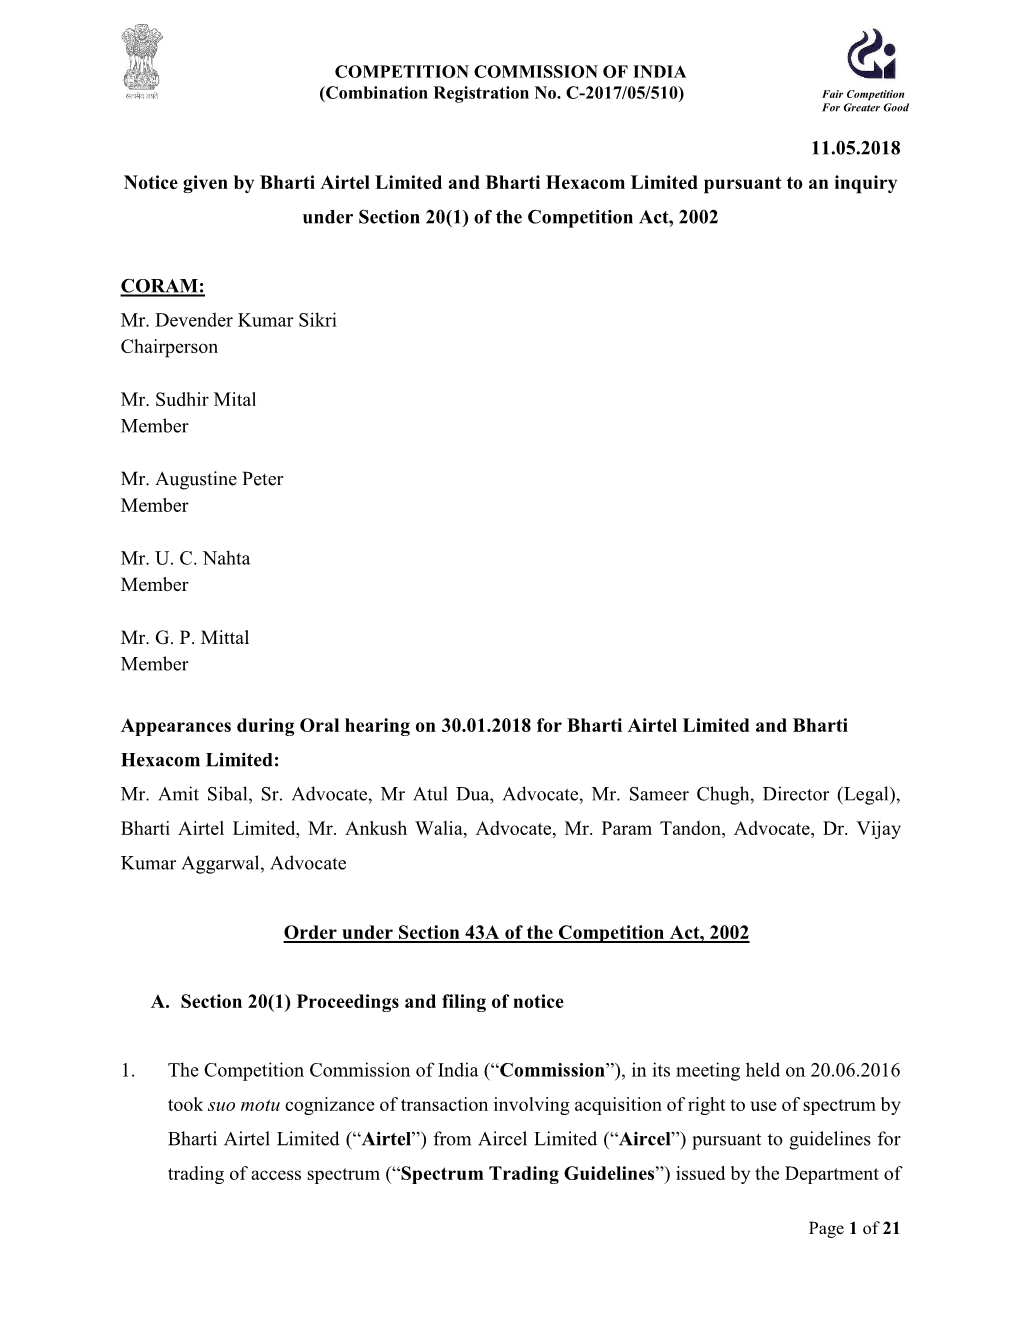 11.05.2018 Notice Given by Bharti Airtel Limited and Bharti Hexacom Limited Pursuant to an Inquiry Under Section 20(1) of the Competition Act, 2002